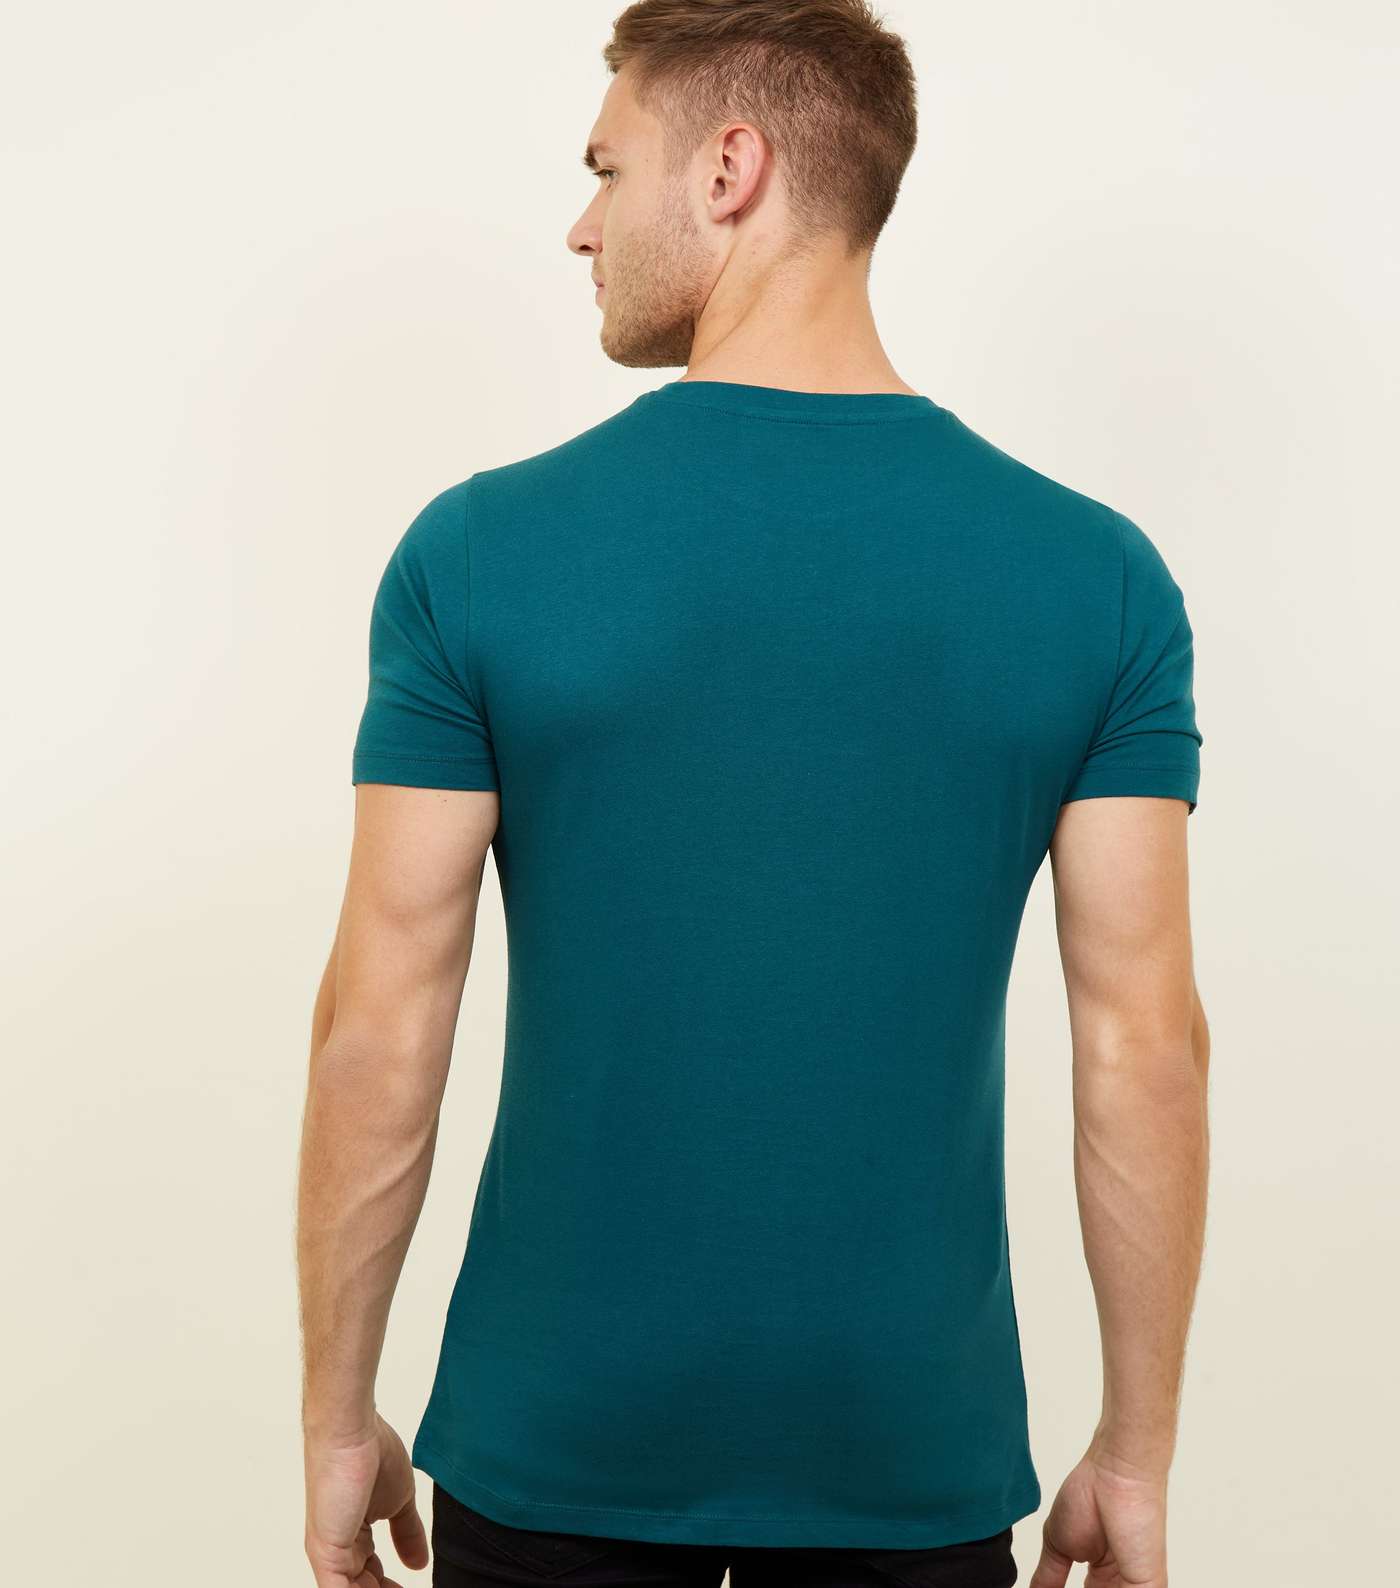 Teal Muscle Fit T-Shirt Image 3